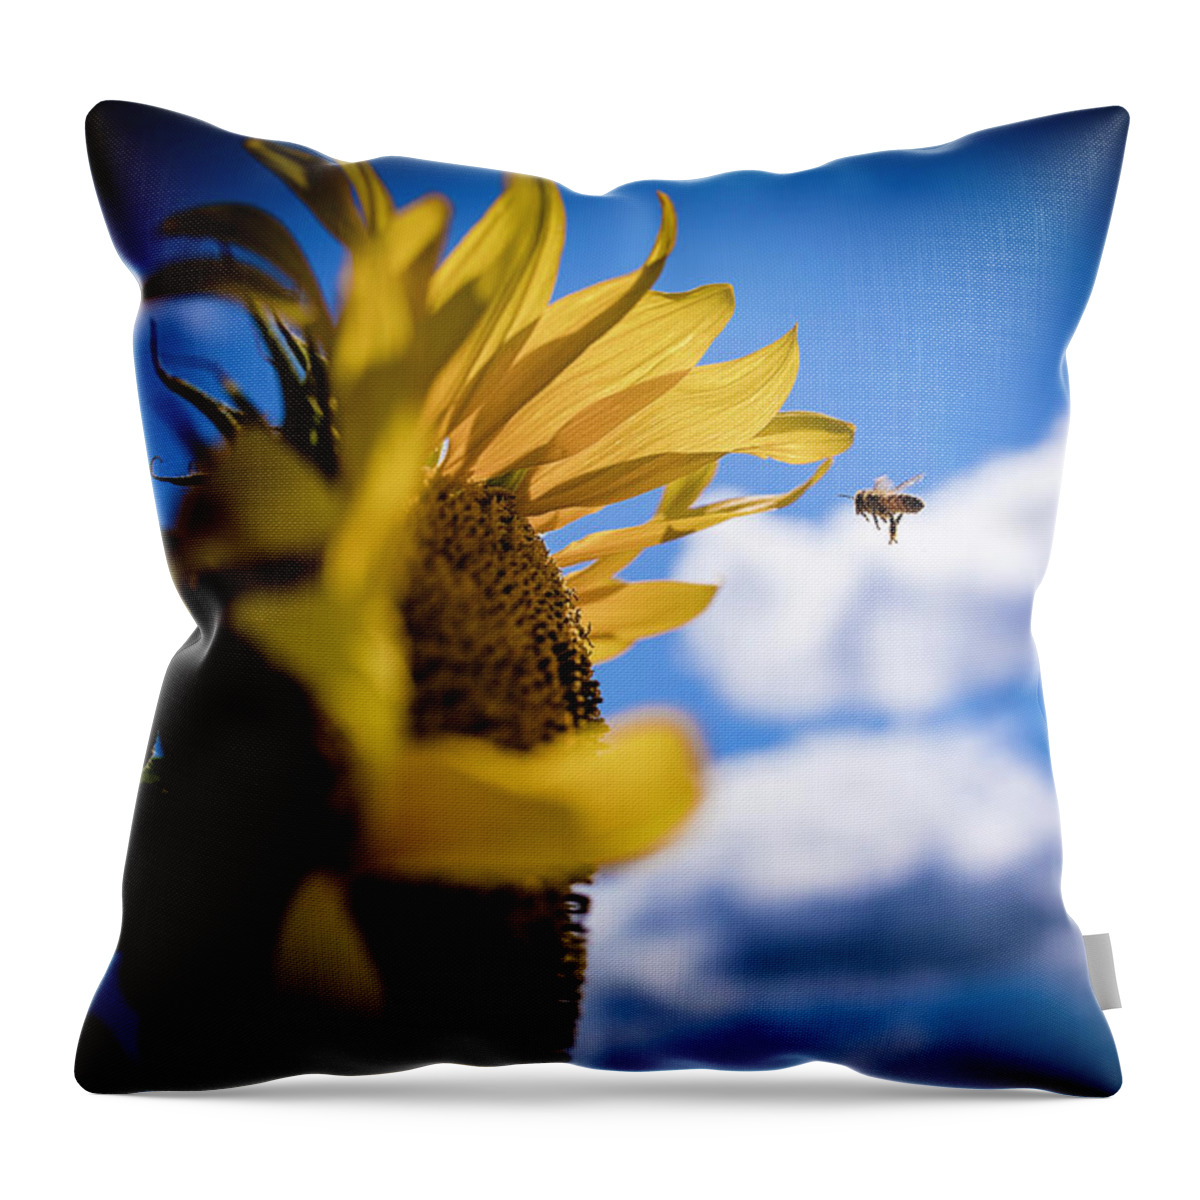  Throw Pillow featuring the photograph Zooming Bee by Nicole Engstrom